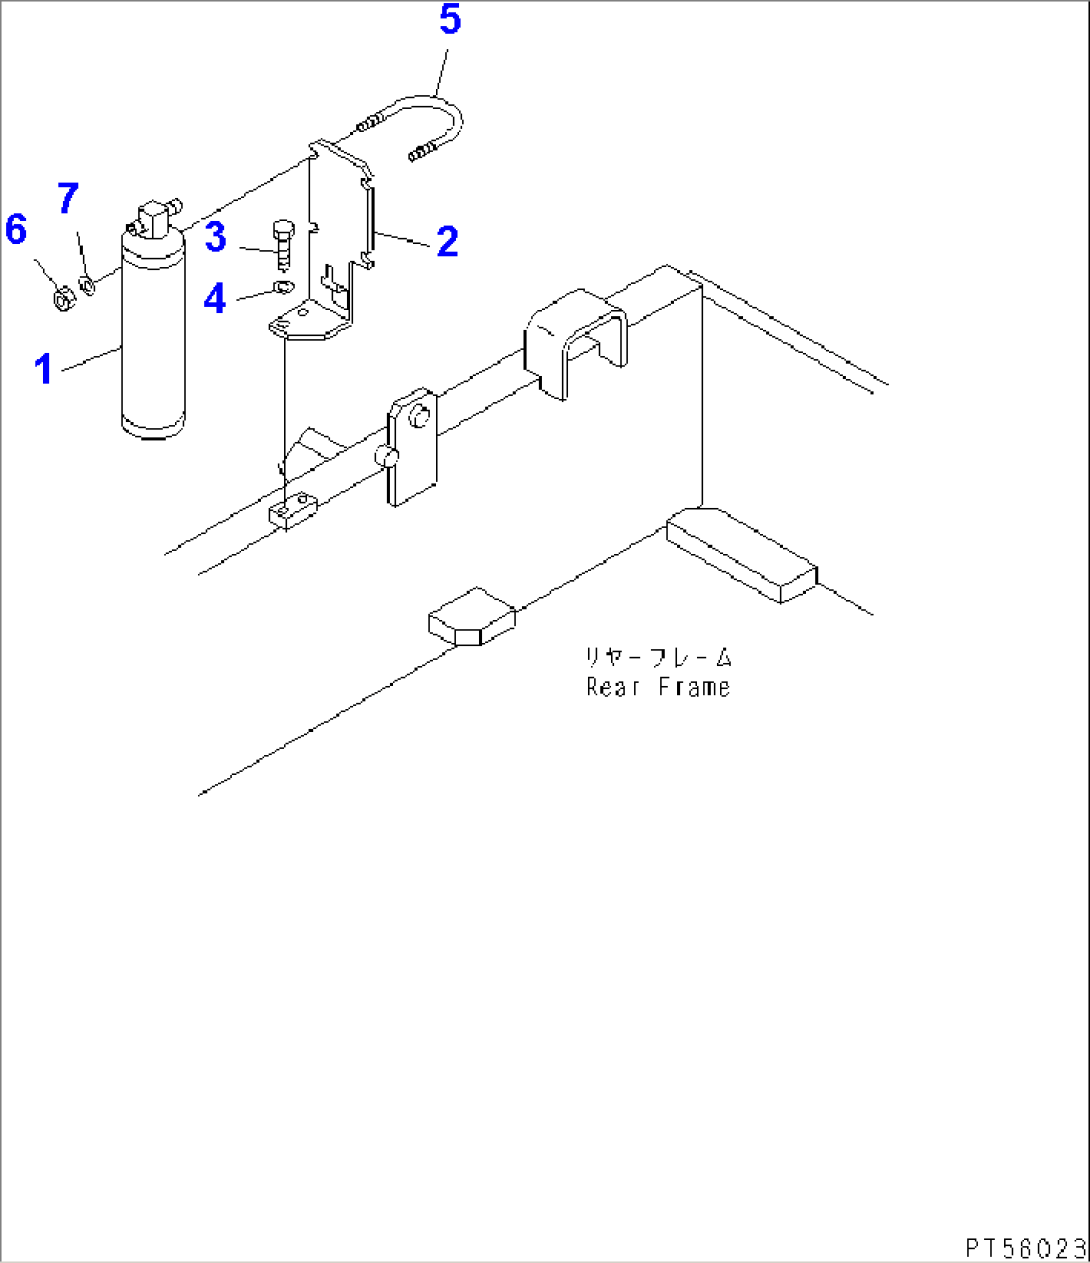 AIR CONDITIONER (RESERVOIR TANK AND BRACKET)